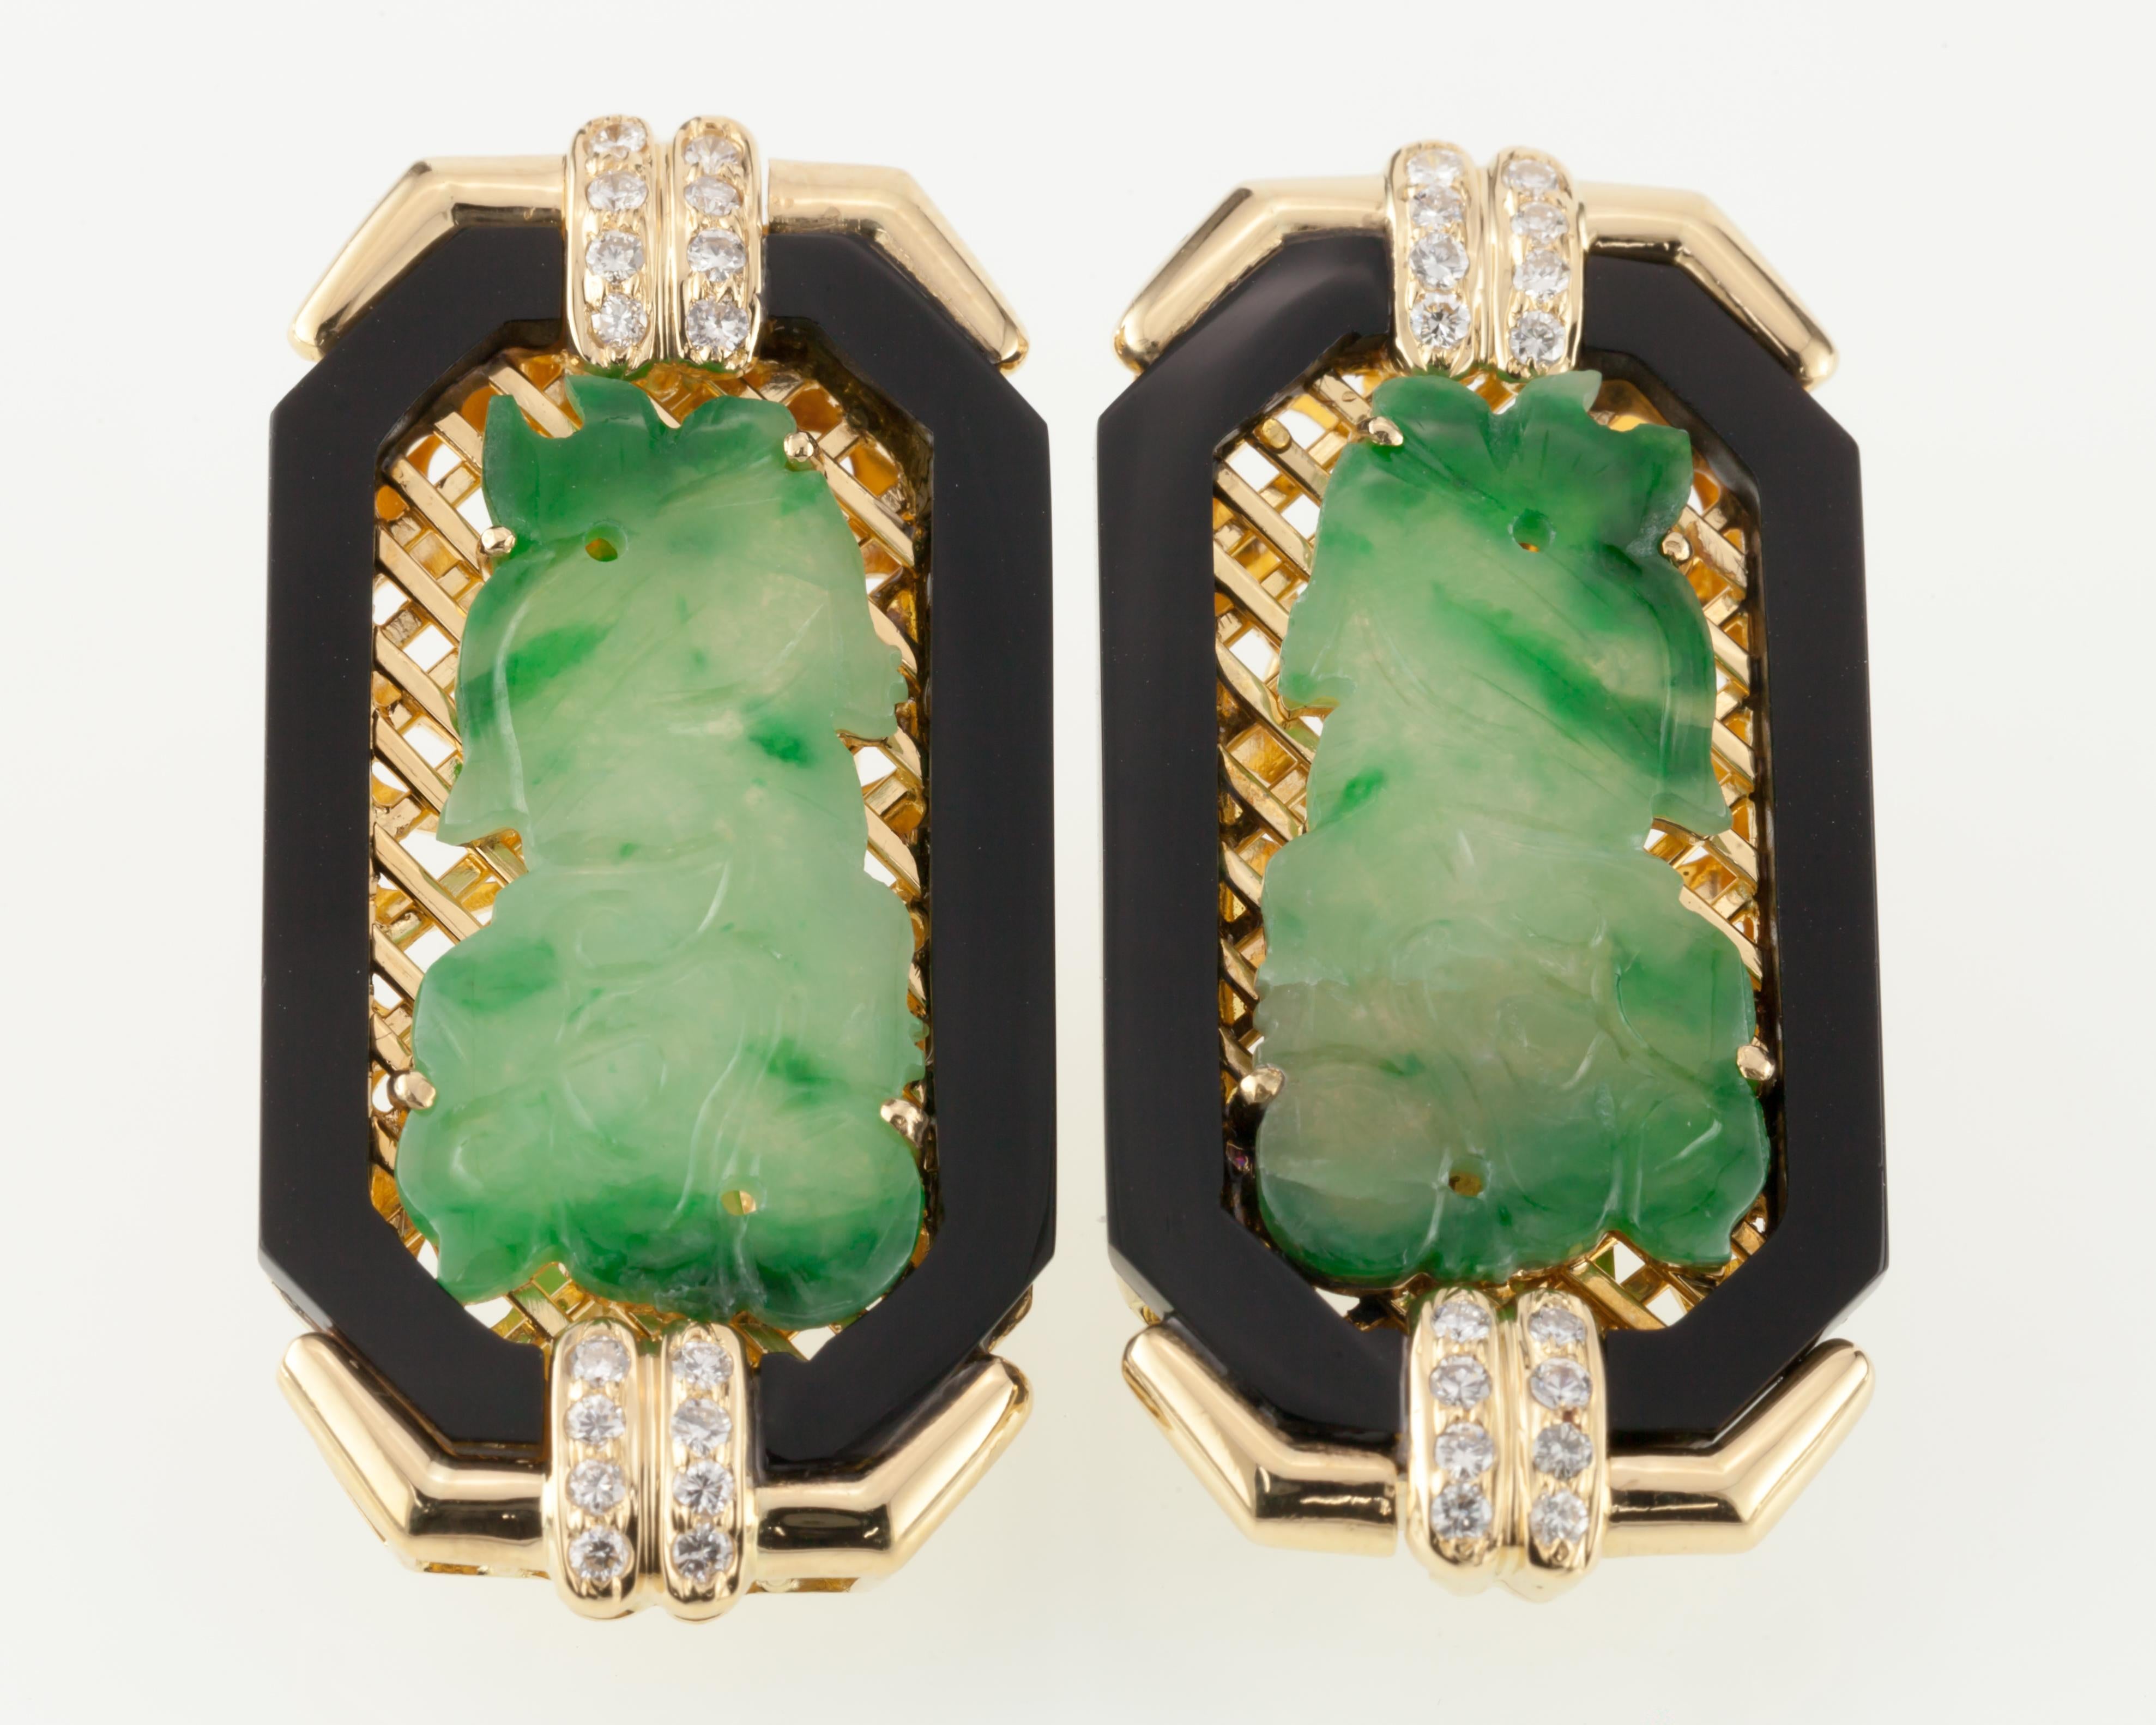 Imperial Jade with Onyx Border and Diamond Accents 18 Karat Yellow Gold Earrings For Sale 1